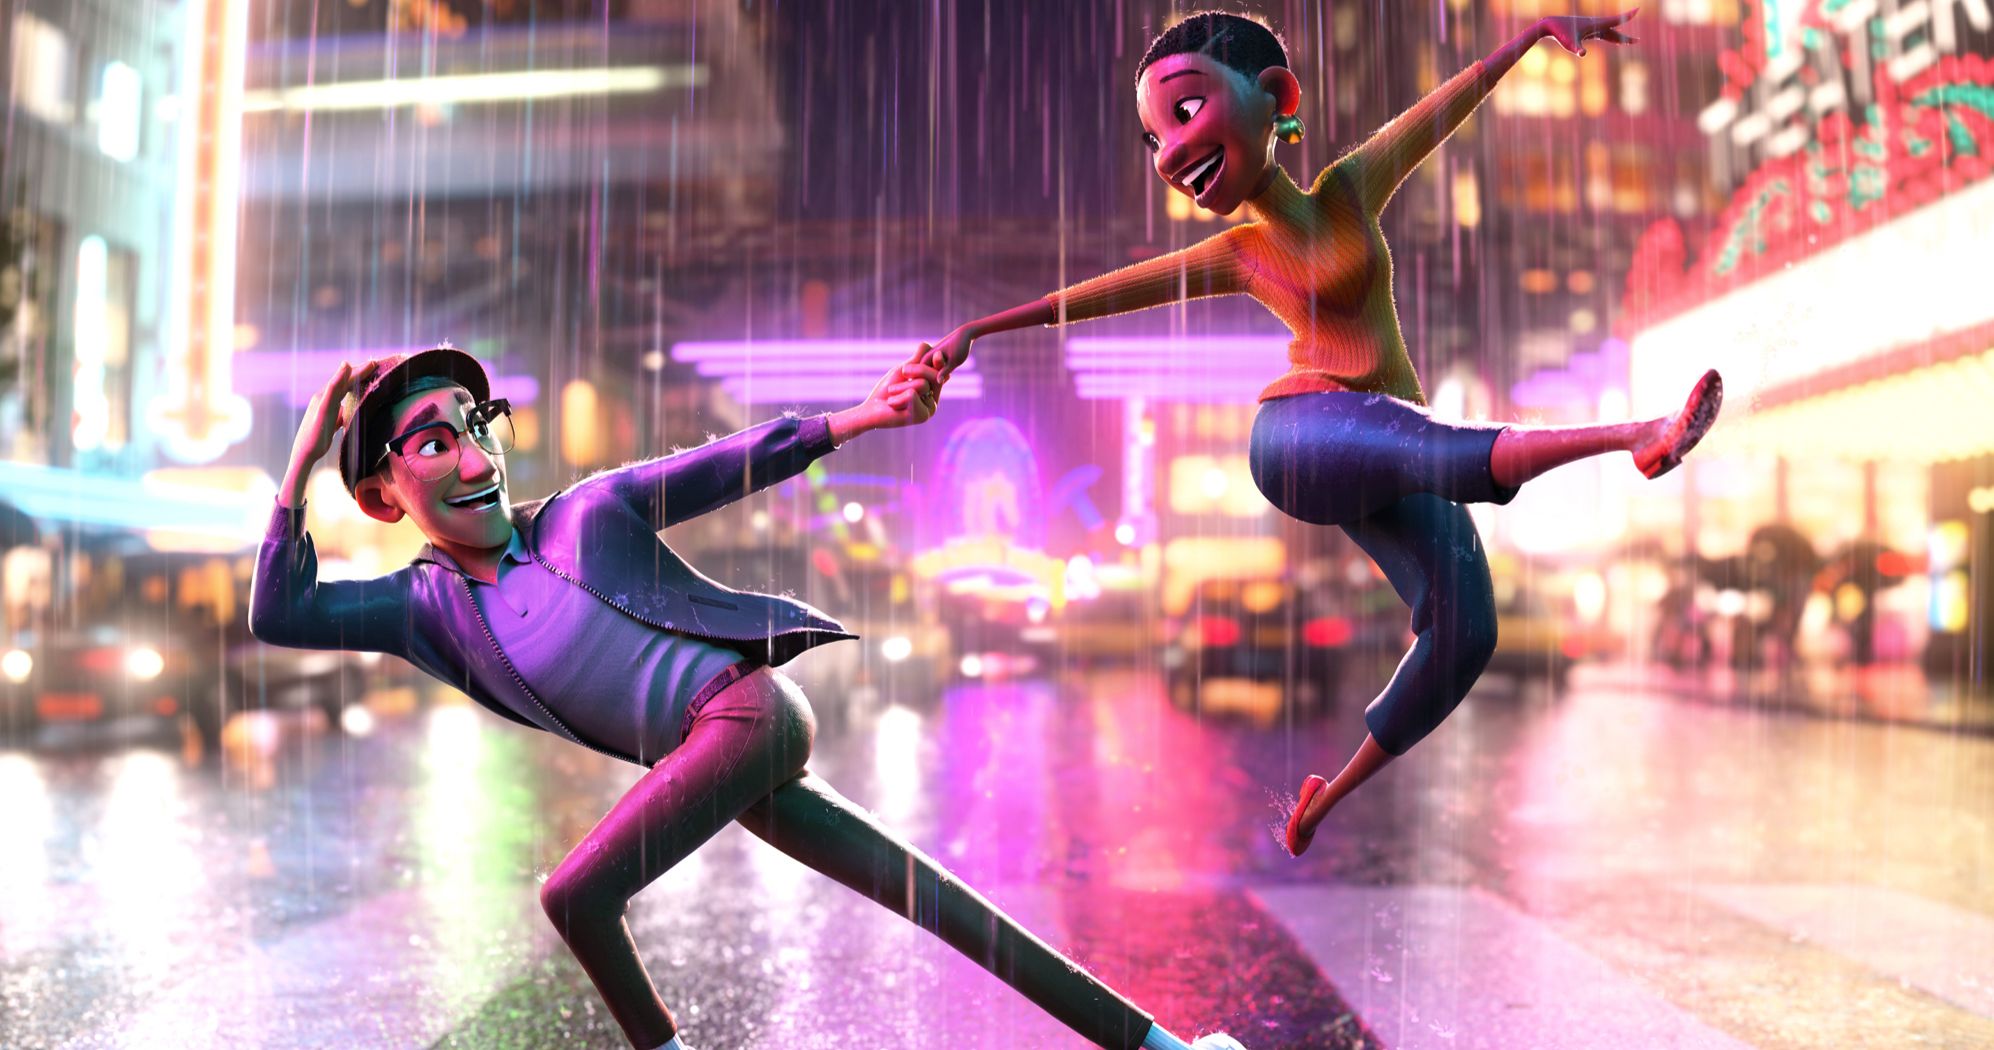 Disney's Us Again Animated Short Will Debut in Movie Theaters with Raya and the Last Dragon